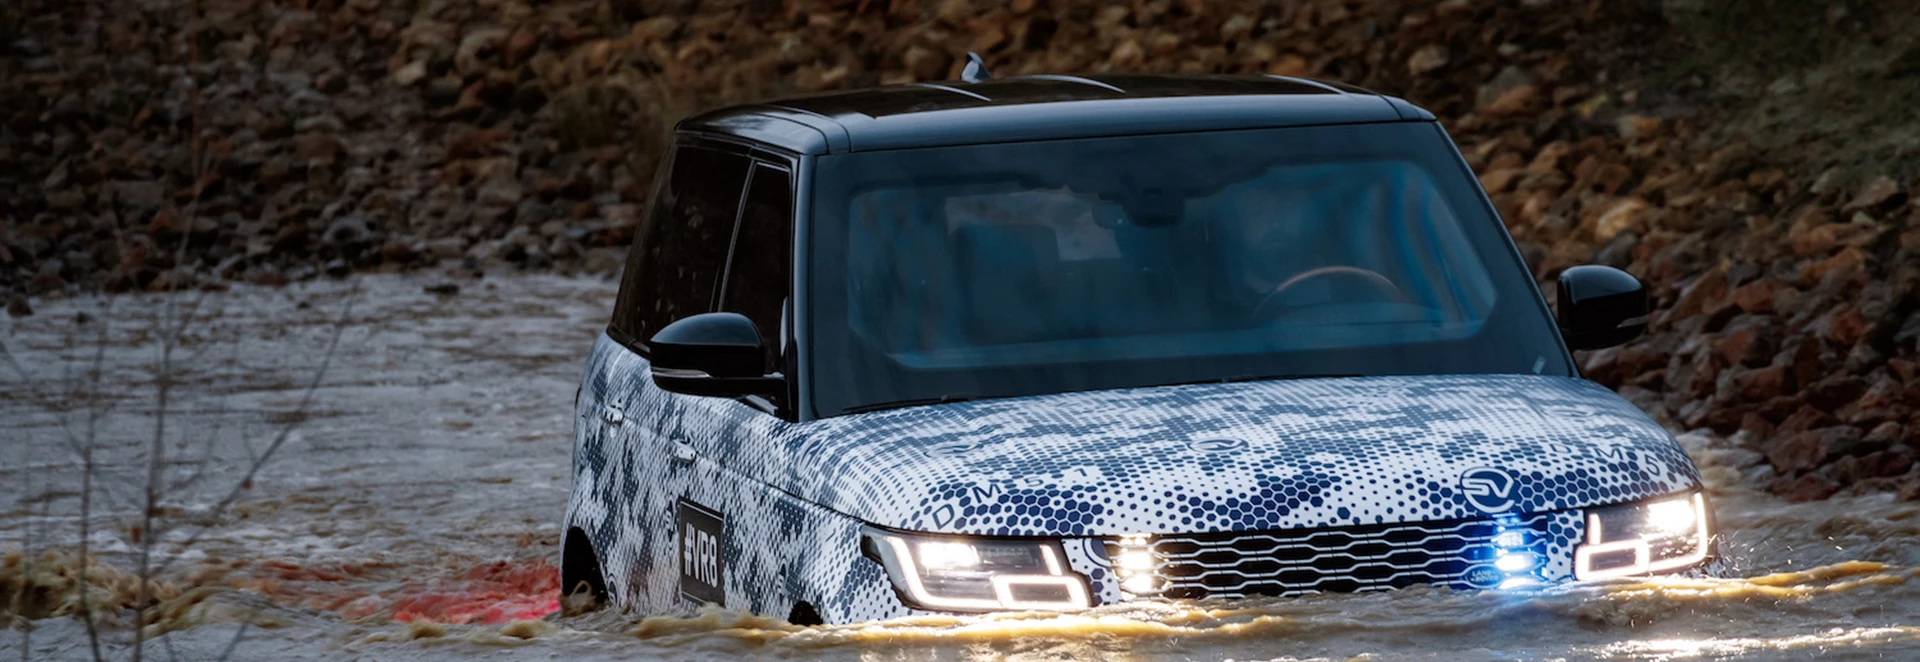 Land Rover unleashes latest Range Rover Sentinel